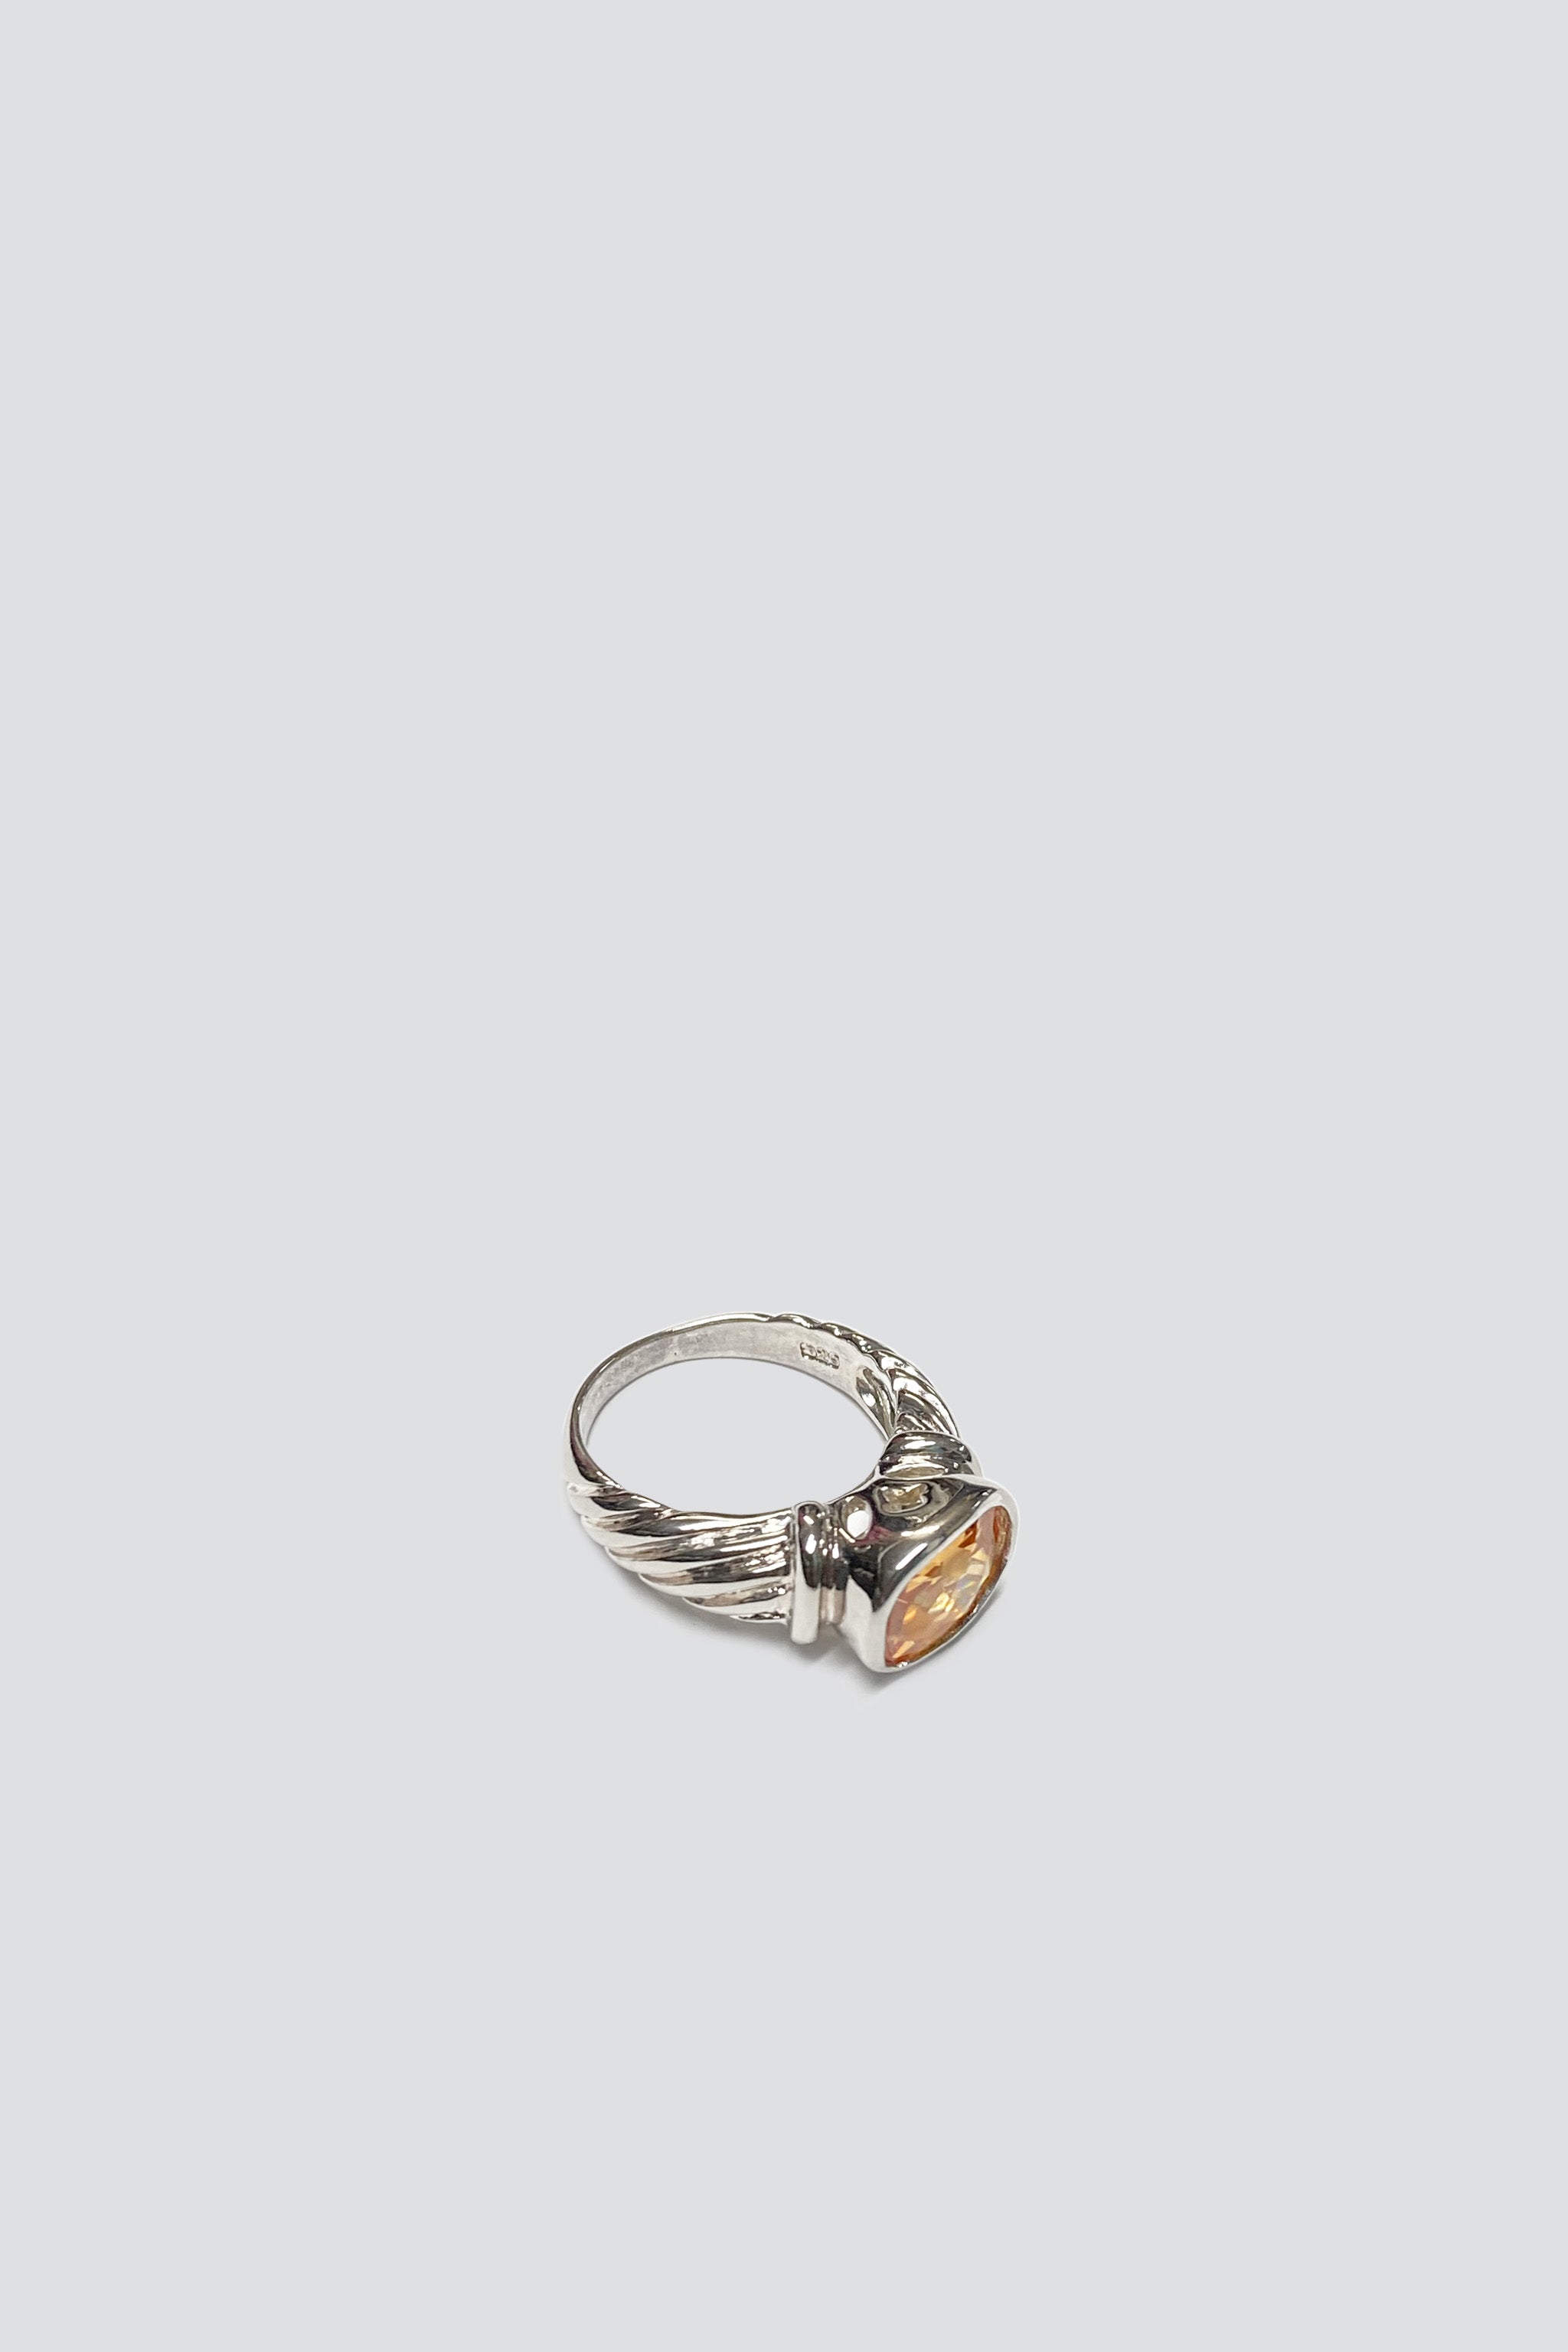 Los Angeles Adjustable Gold Textured Ring with Crystal Details – ARTEMIS  THE BOUTIQUE